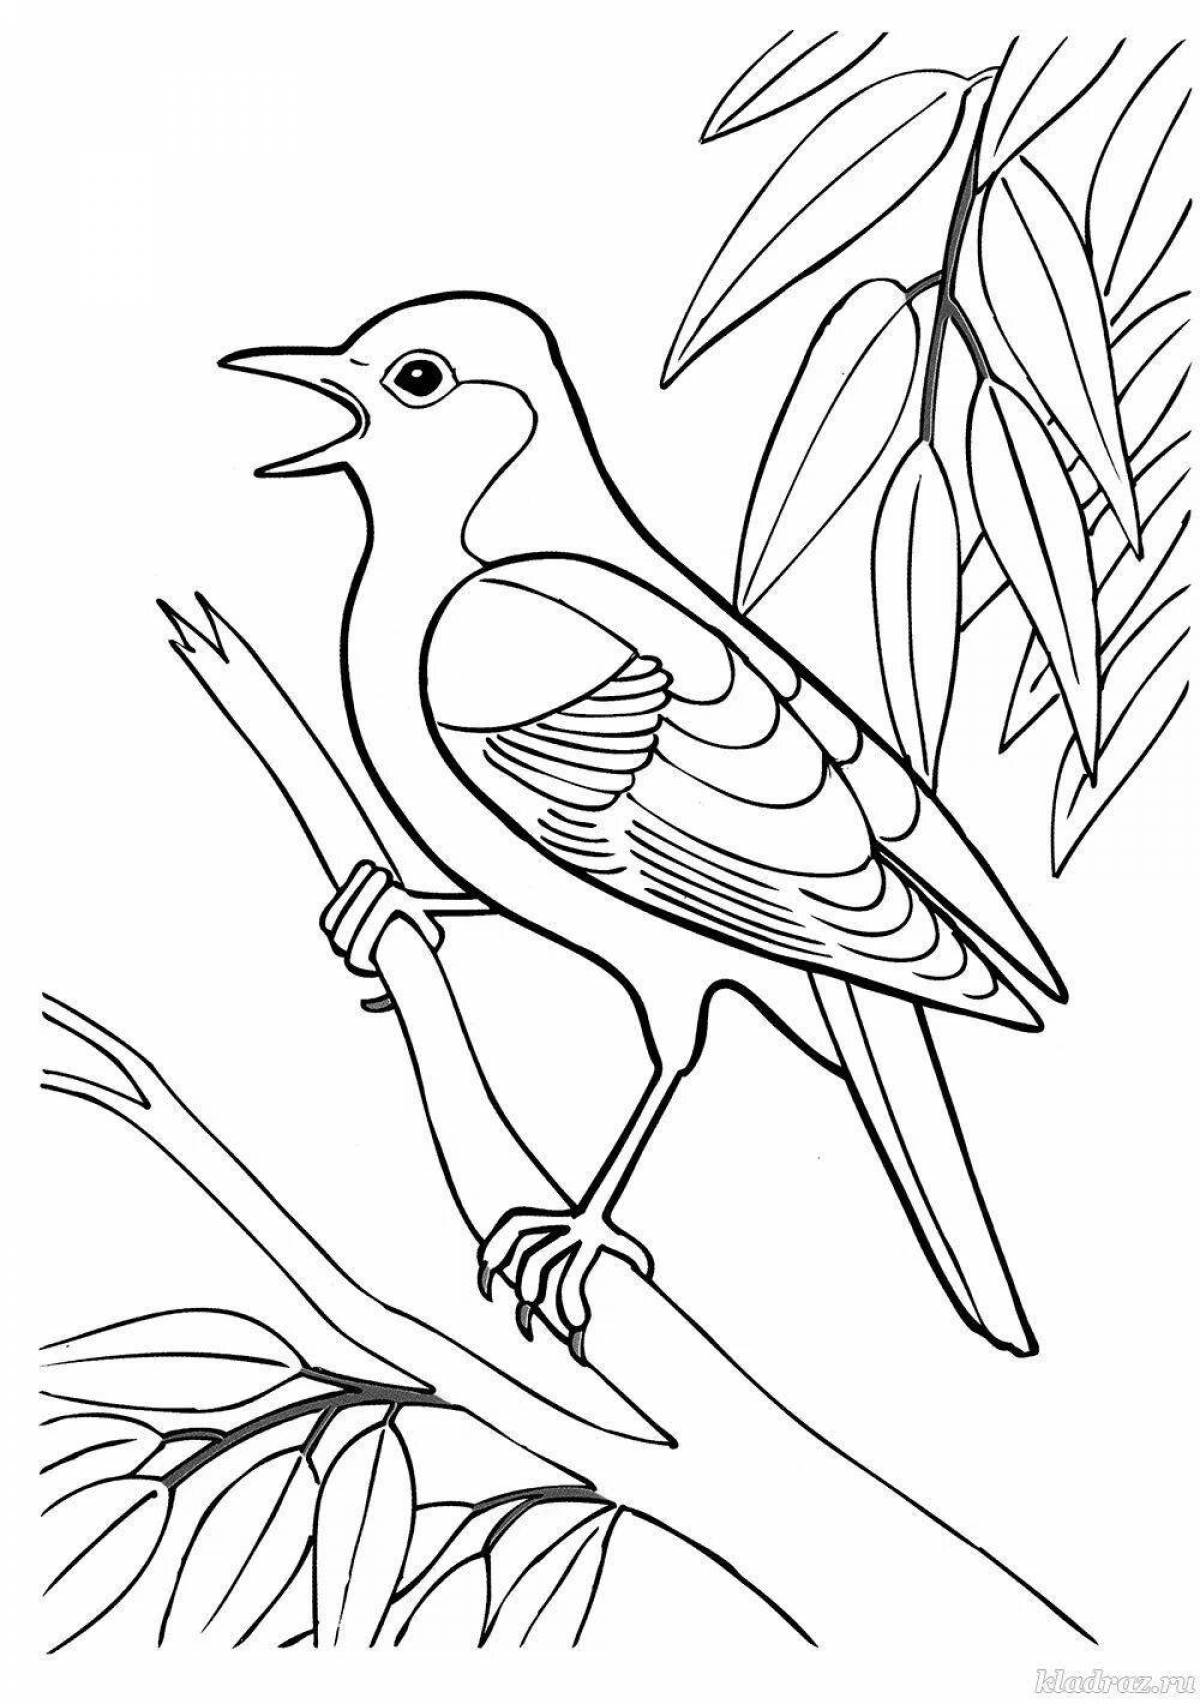 Amazing coloring pages of migratory birds for kids